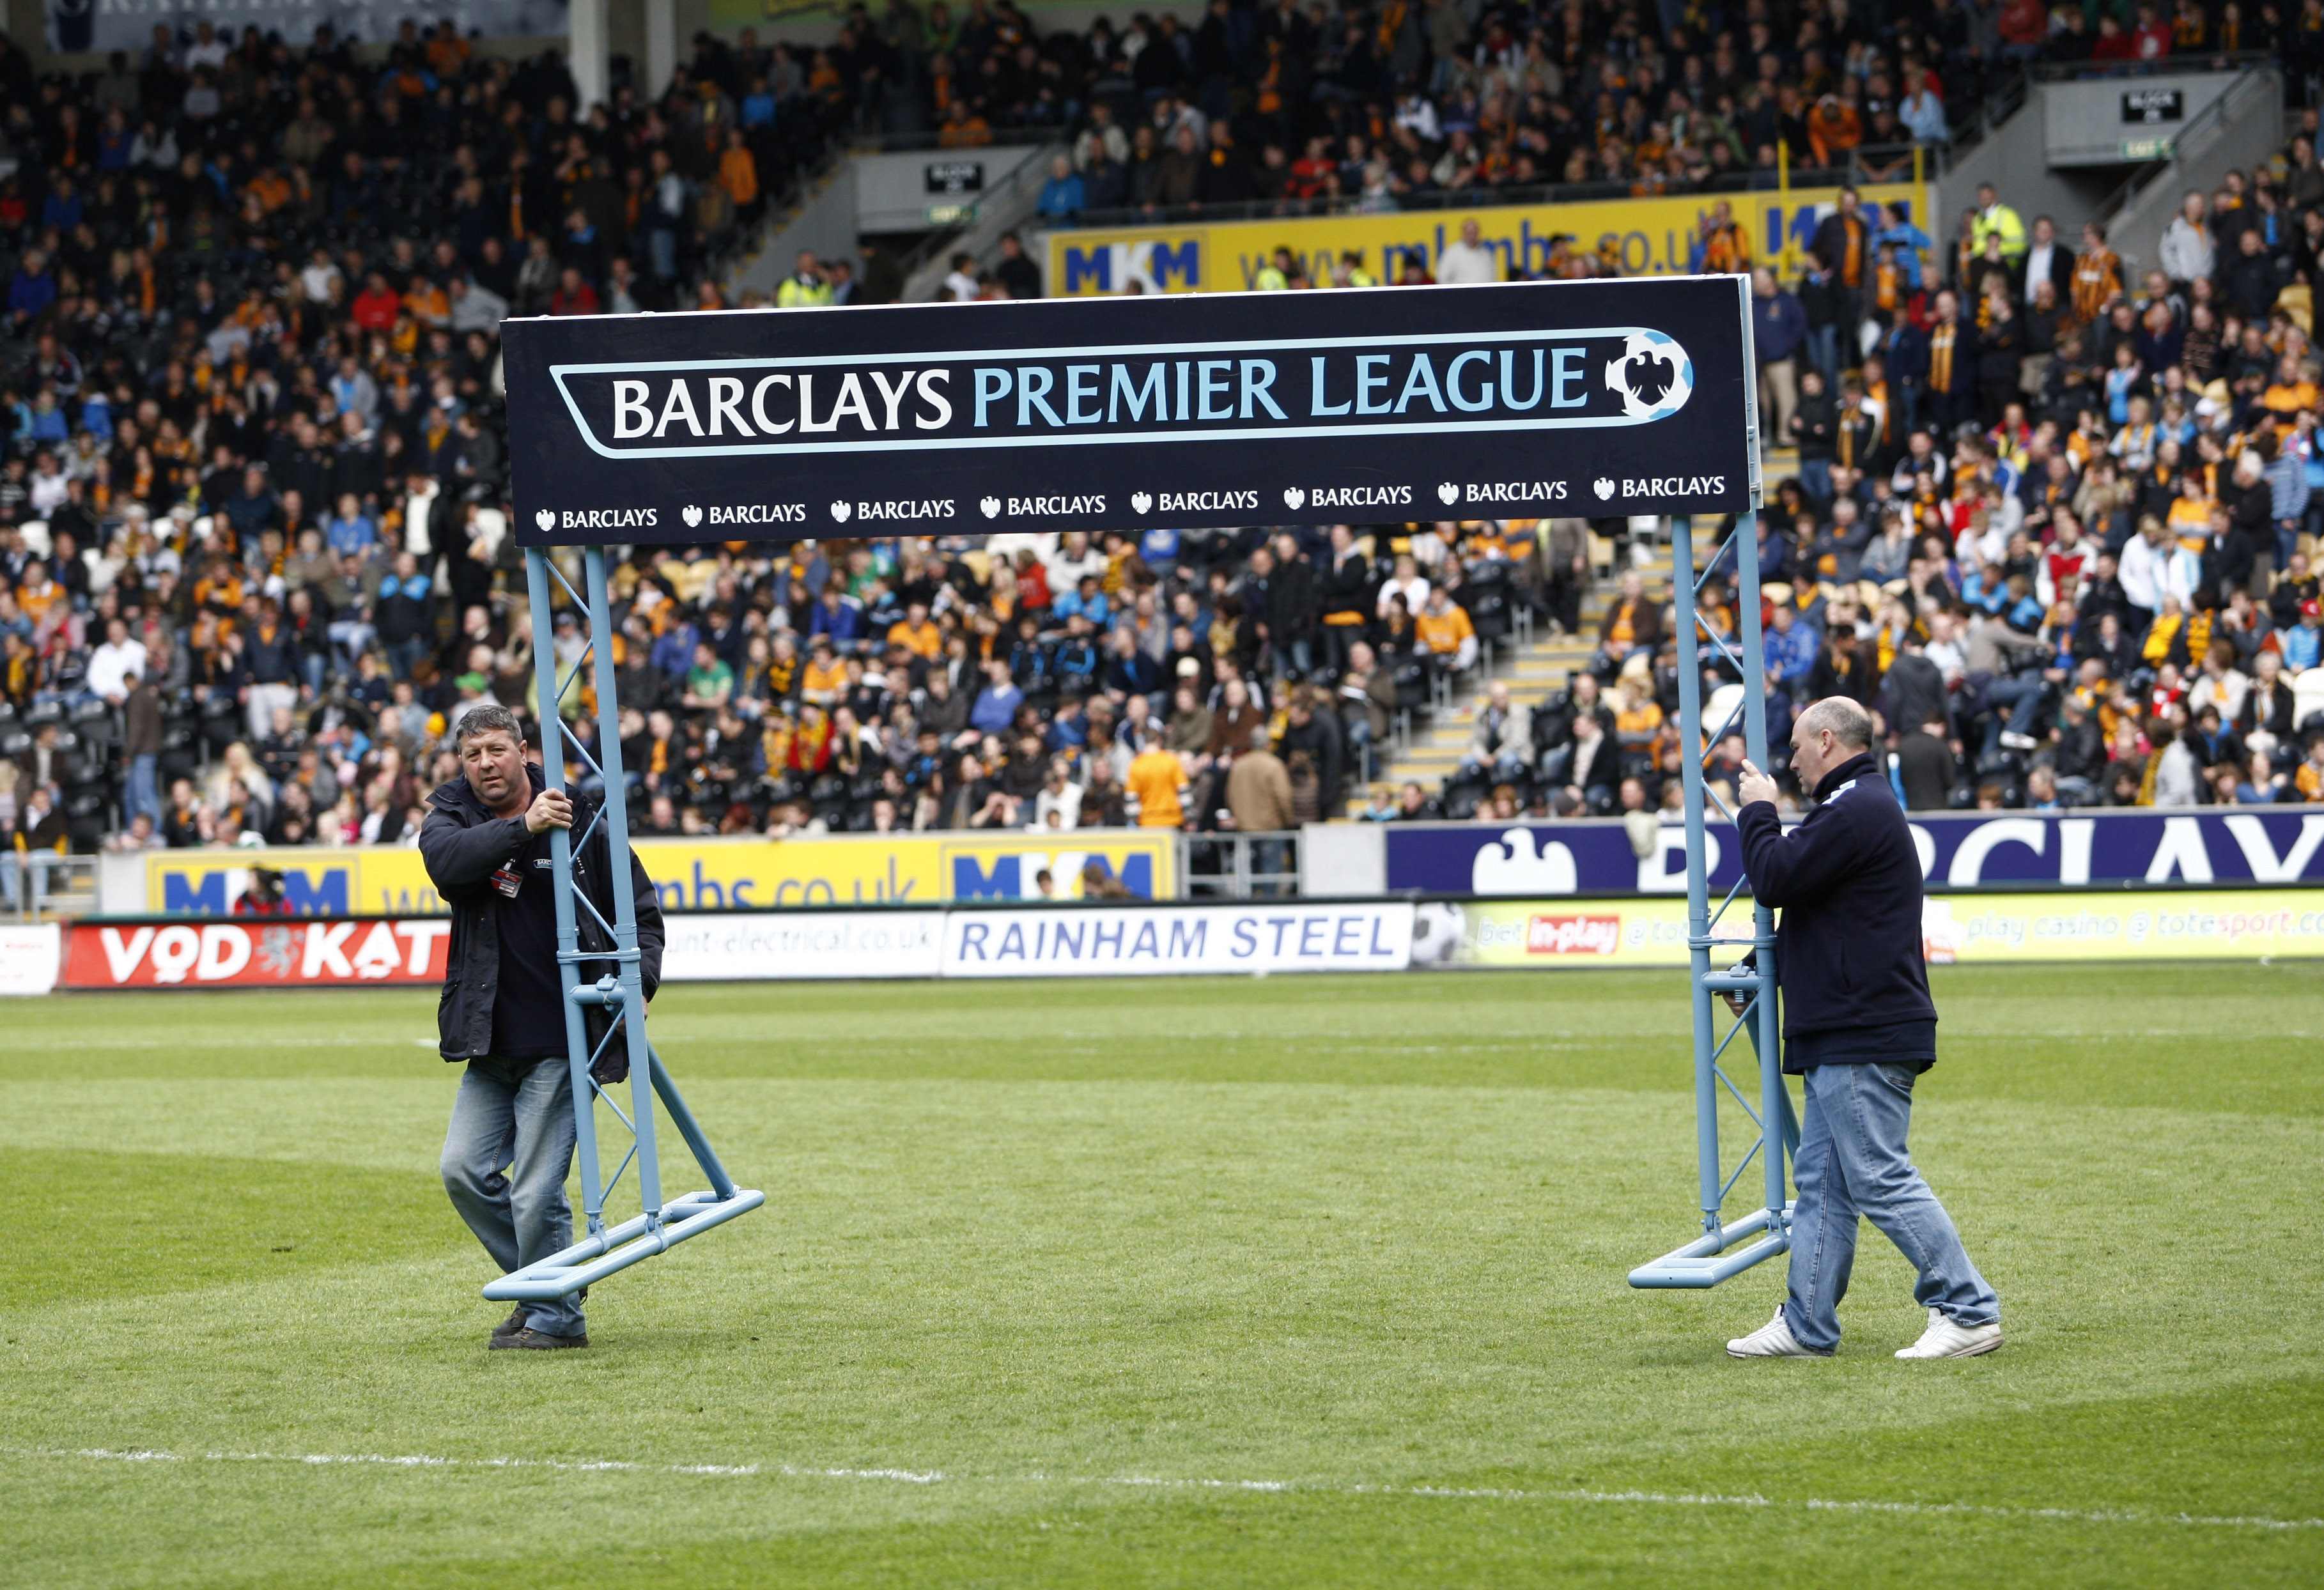 HULL, ENGLAND - MAY 9: The Barclay Premier League sign is removed from the pitch just before the start of the final premier league game at relegated Hull City's KC stadium during the Barclays Premier League match between Hull City and Liverpool at the KC 